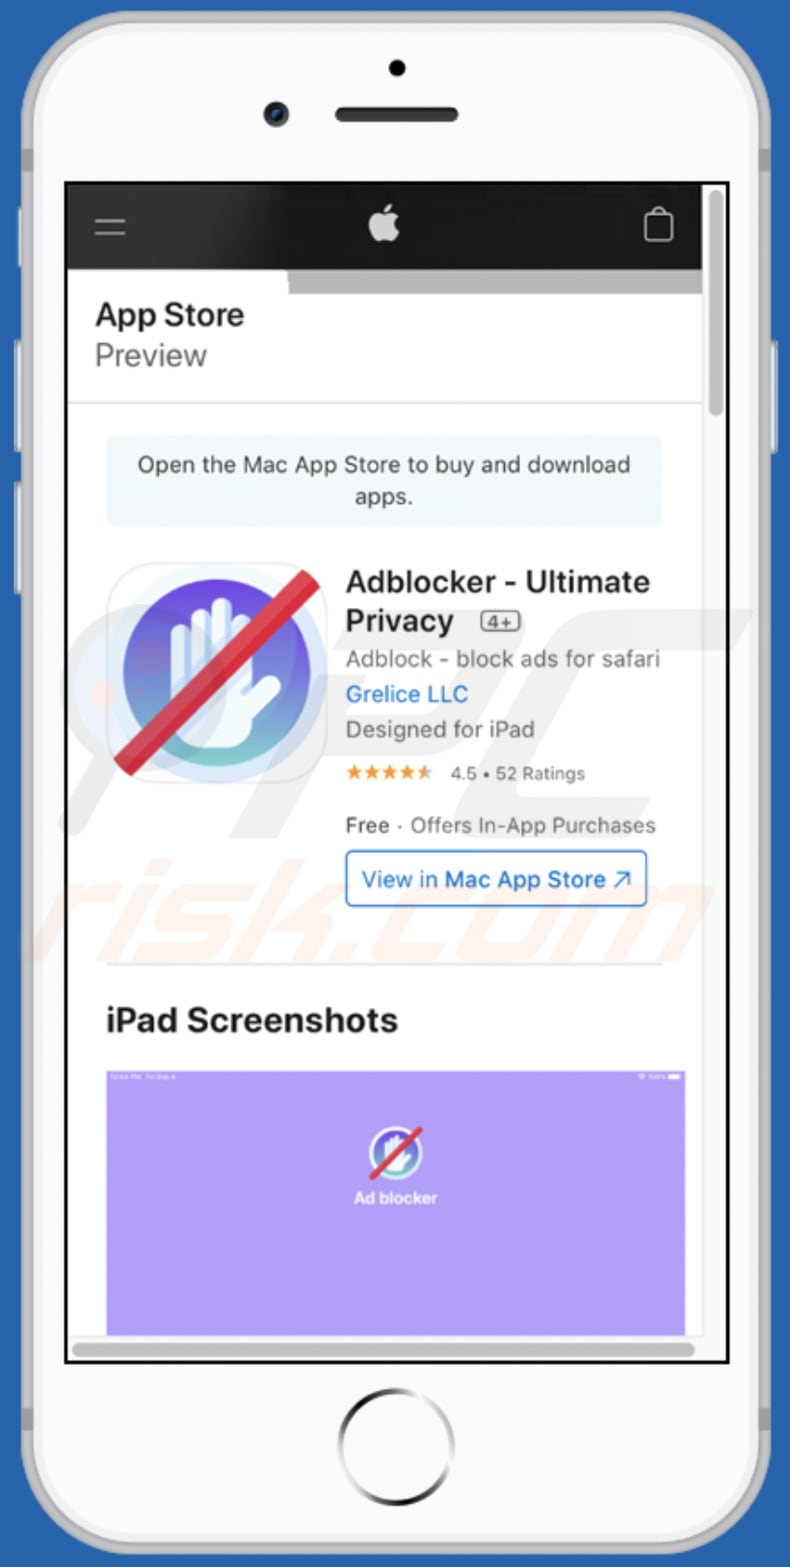 appleconnect.safellk.com scam app promoted on the main variant